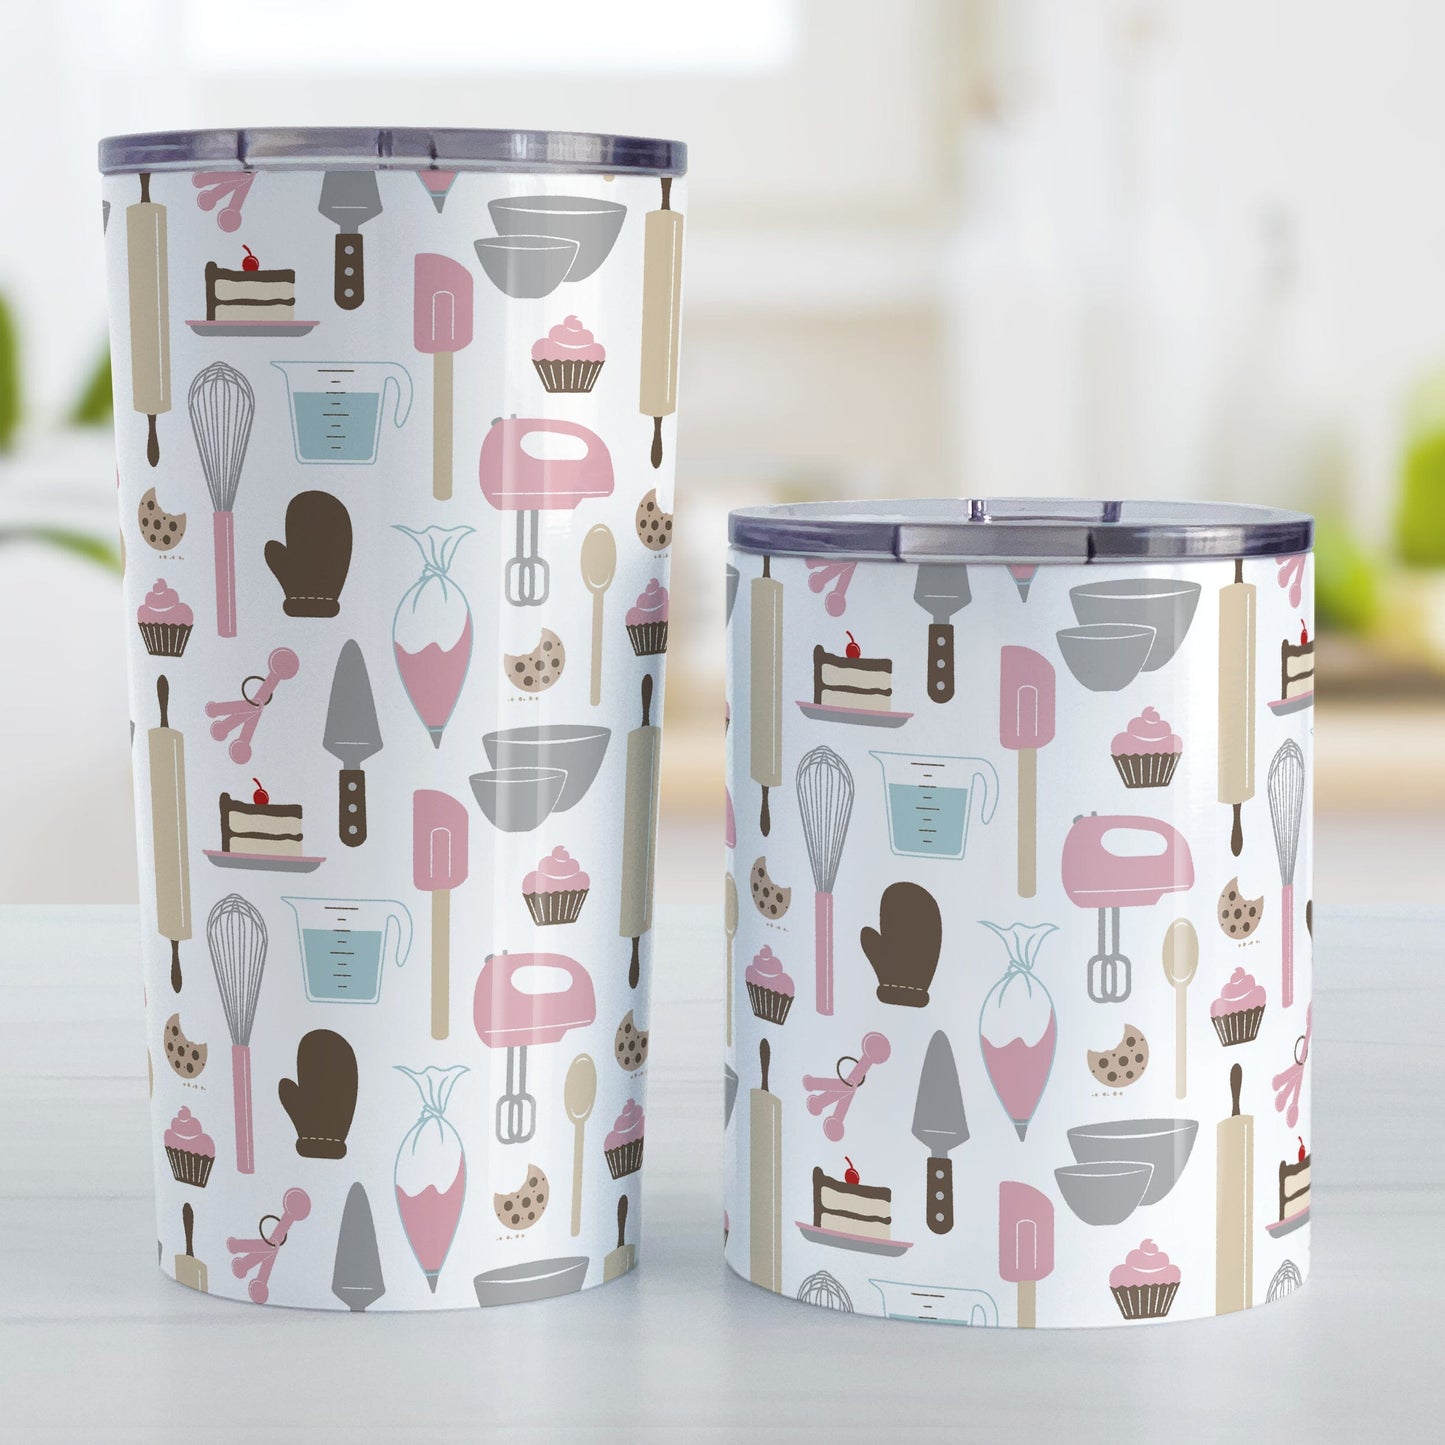 Pink Baking Pattern Tumbler Cups (20oz or 10oz) at Amy's Coffee Mugs. Stainless steel tumbler cups designed with a pattern of baking tools like spatulas, whisks, mixers, bowls, and spoons, with cookies, cupcakes, and cake all in a pink, gray, brown, and beige color scheme that wraps around the cups. Photo shows both sized cups on a table next to each other. 